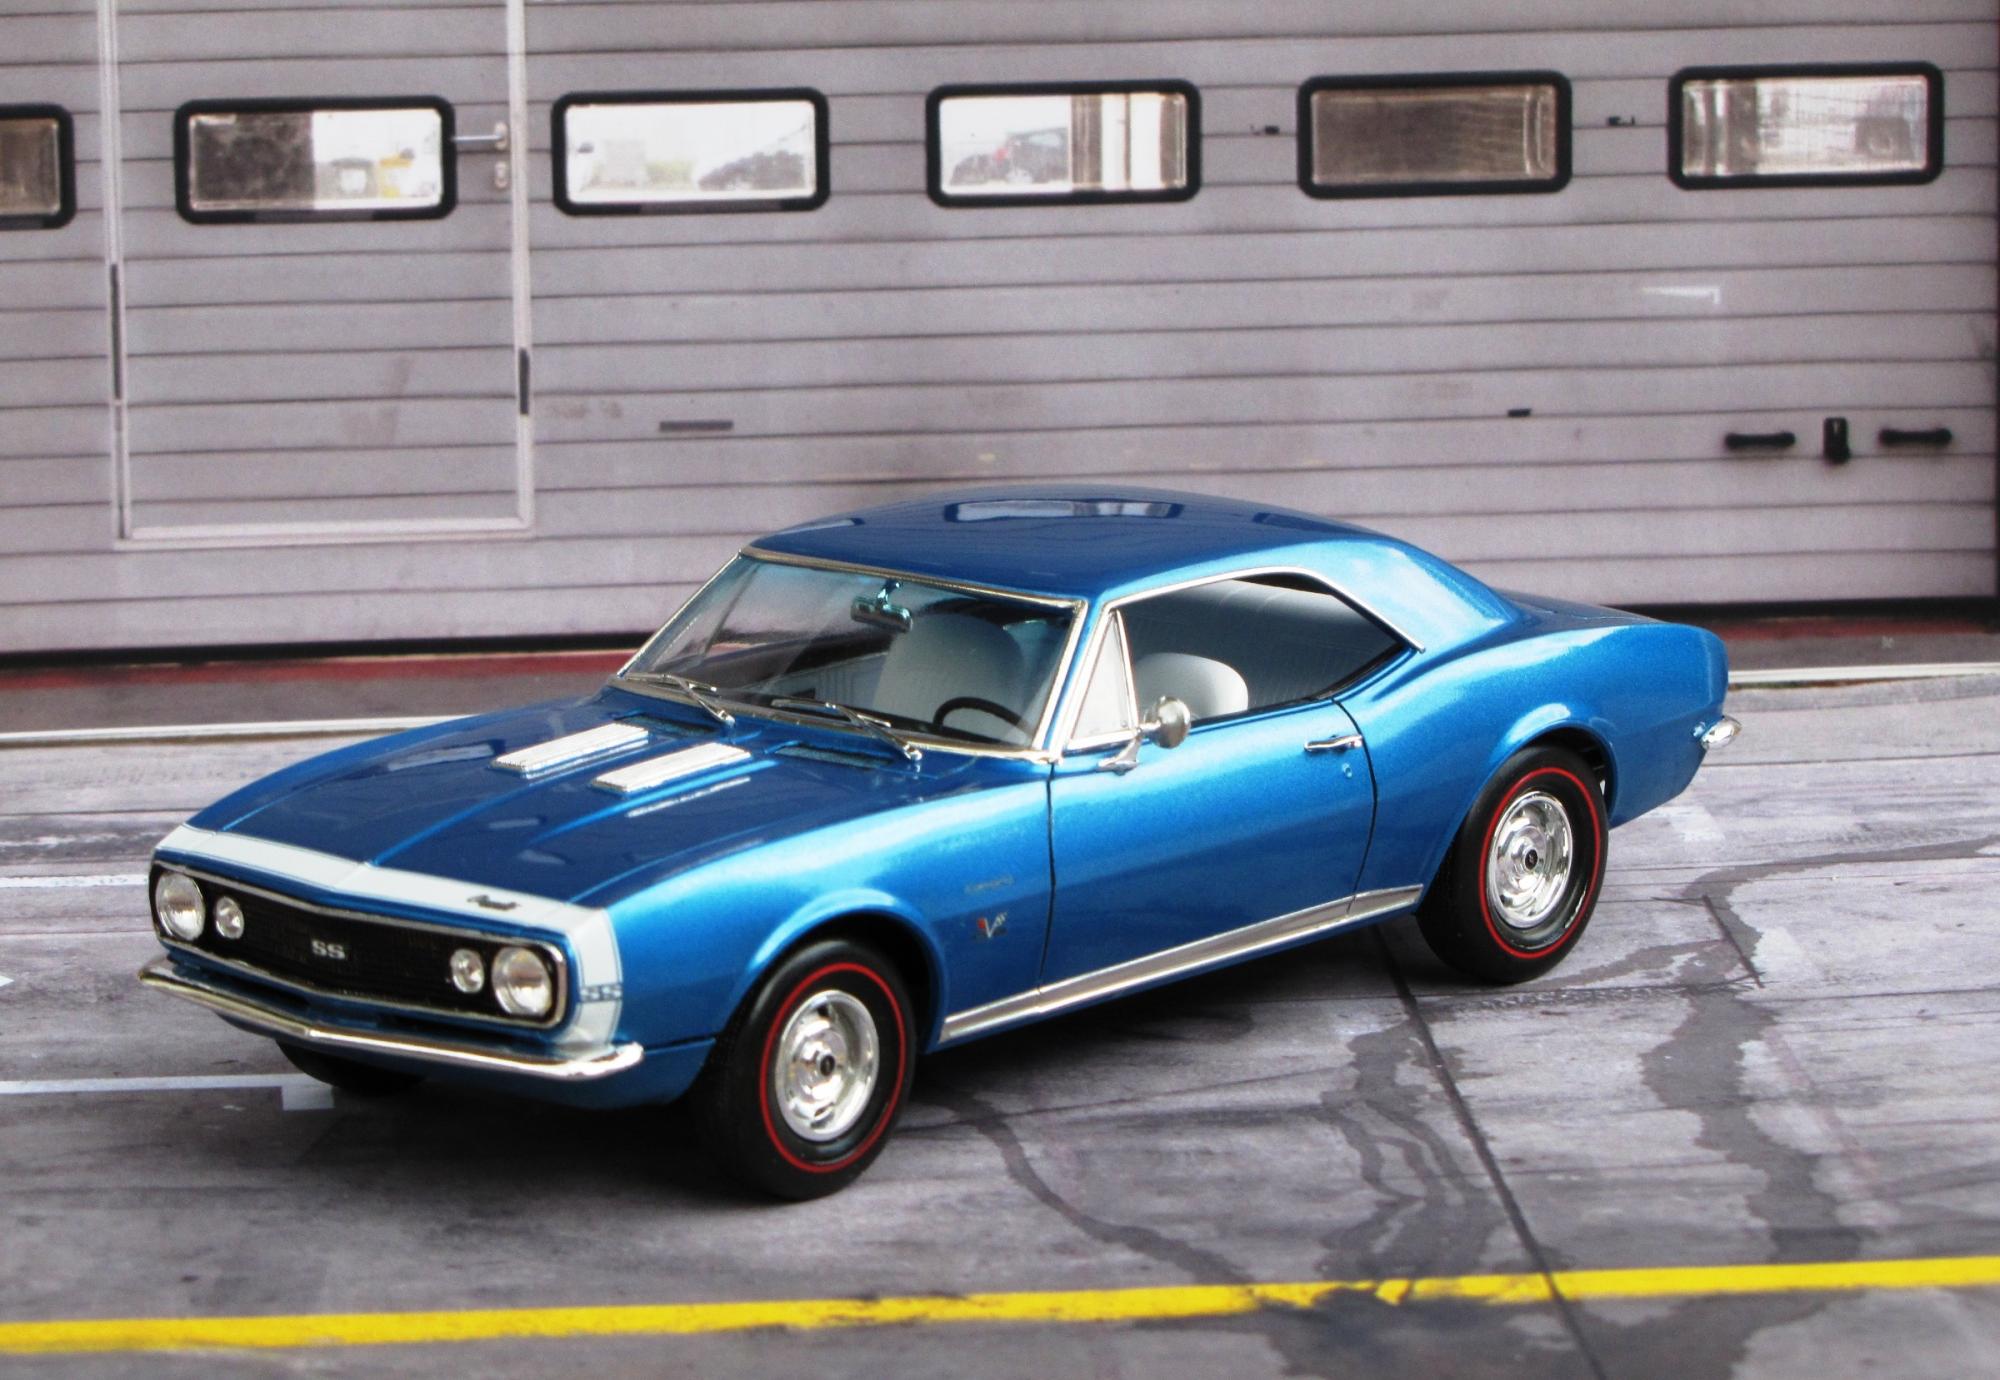 View the topic 1967 Chevrolet Camaro SS 396.